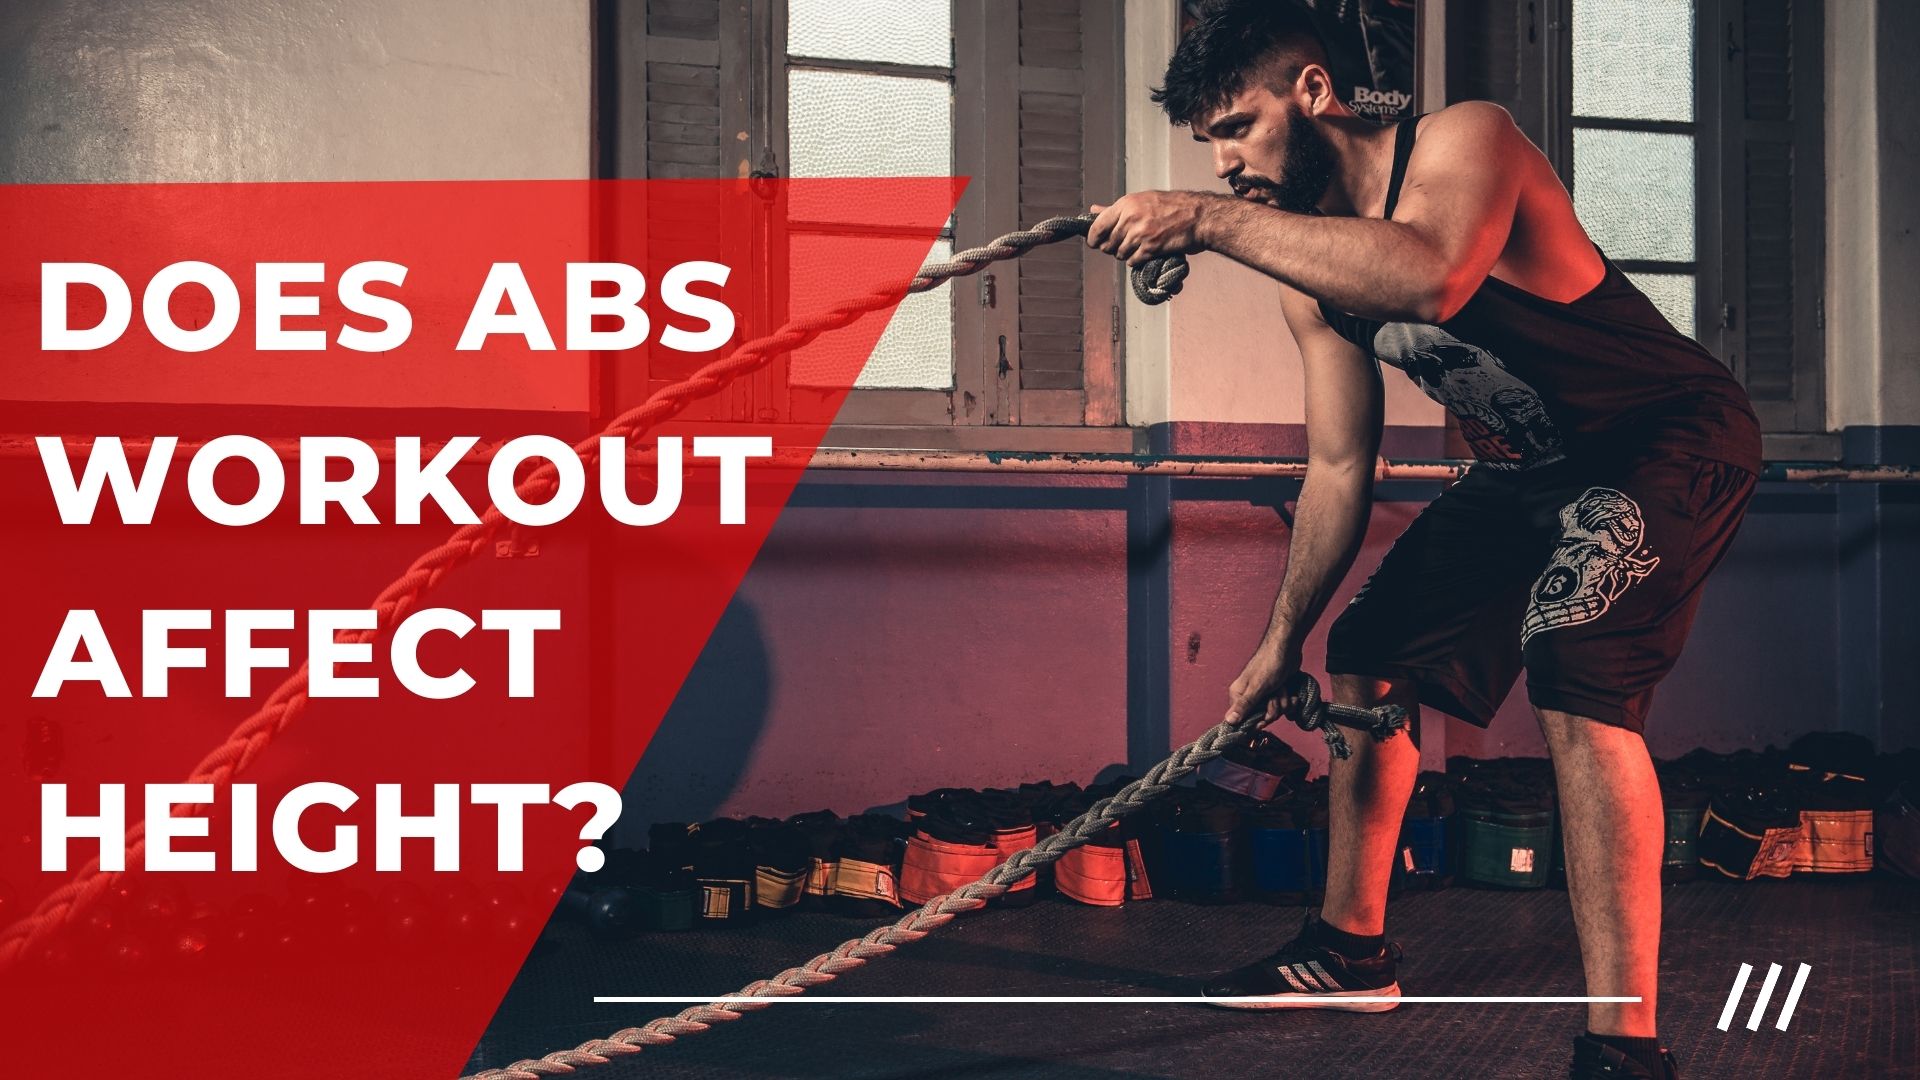 Does Abs Workout Affect